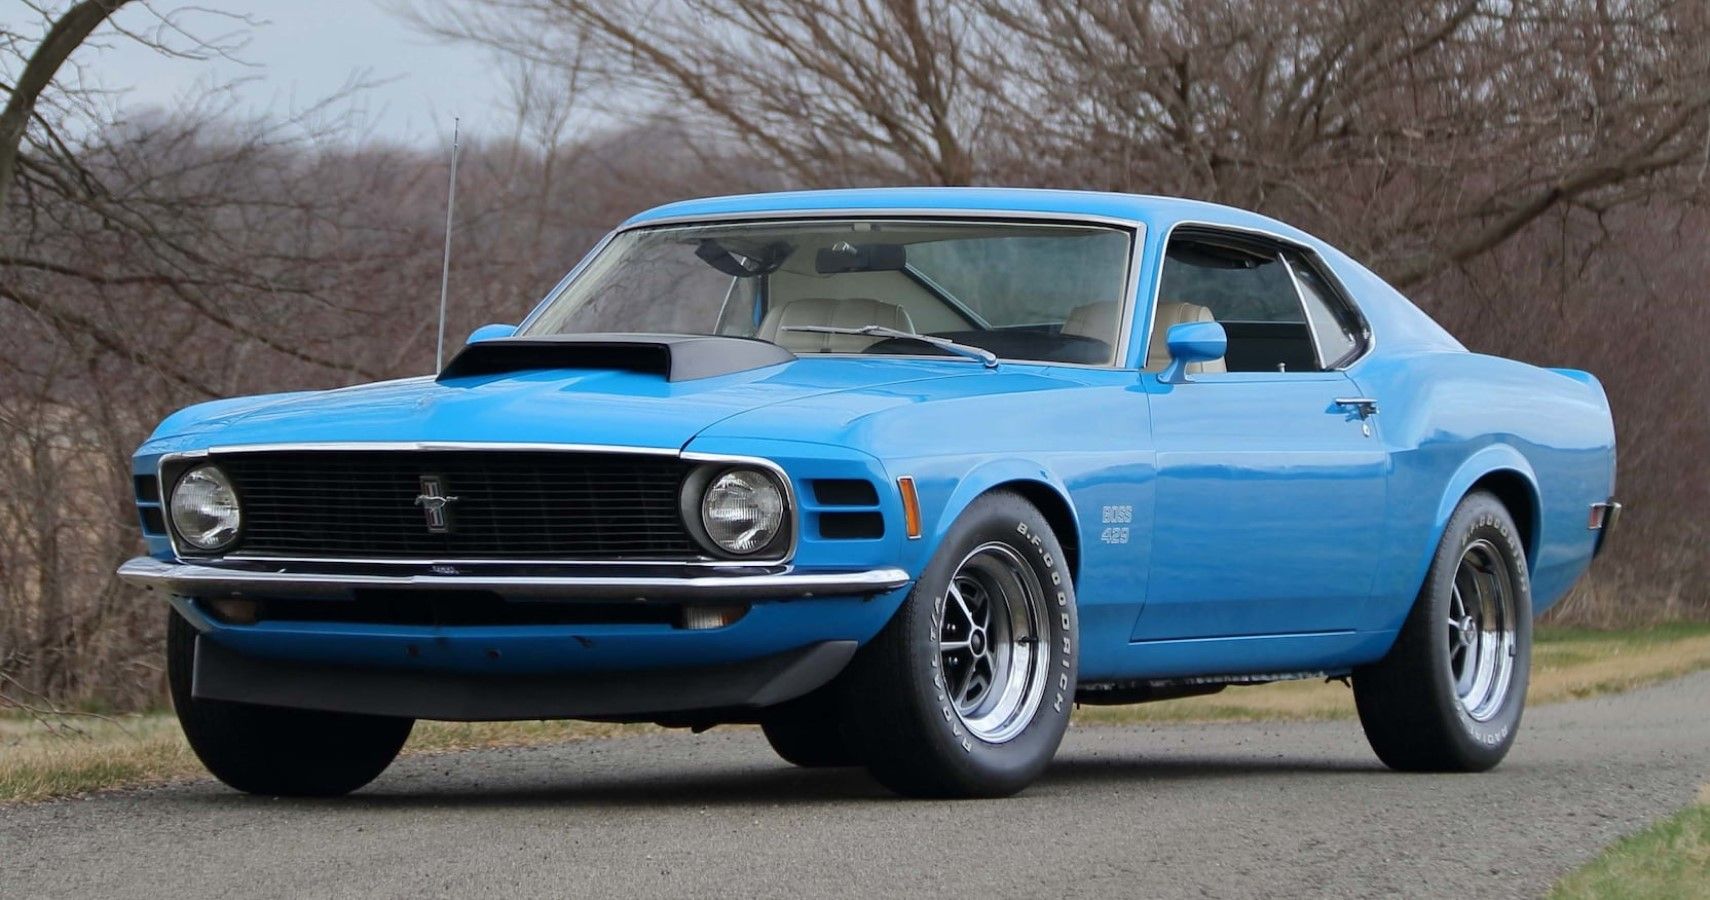 BLUE 1970 MUSTANG BOSS 429 FASTBACK parked